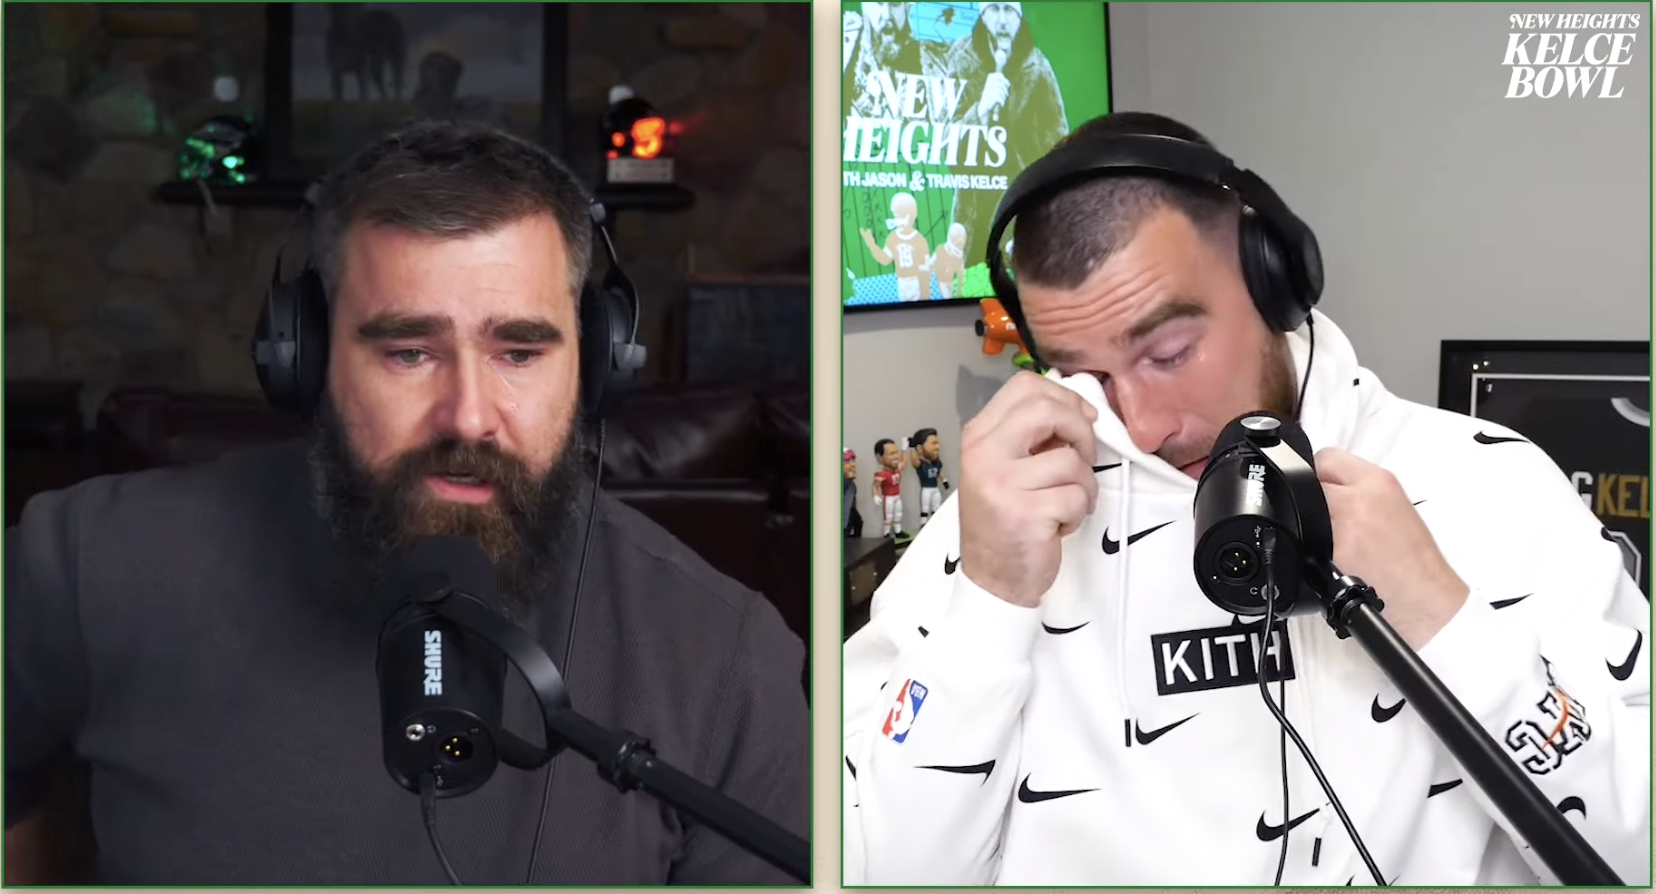 Podcast Review: New Heights – Travis and Jason Kelce open up on Super Bowl reactions.